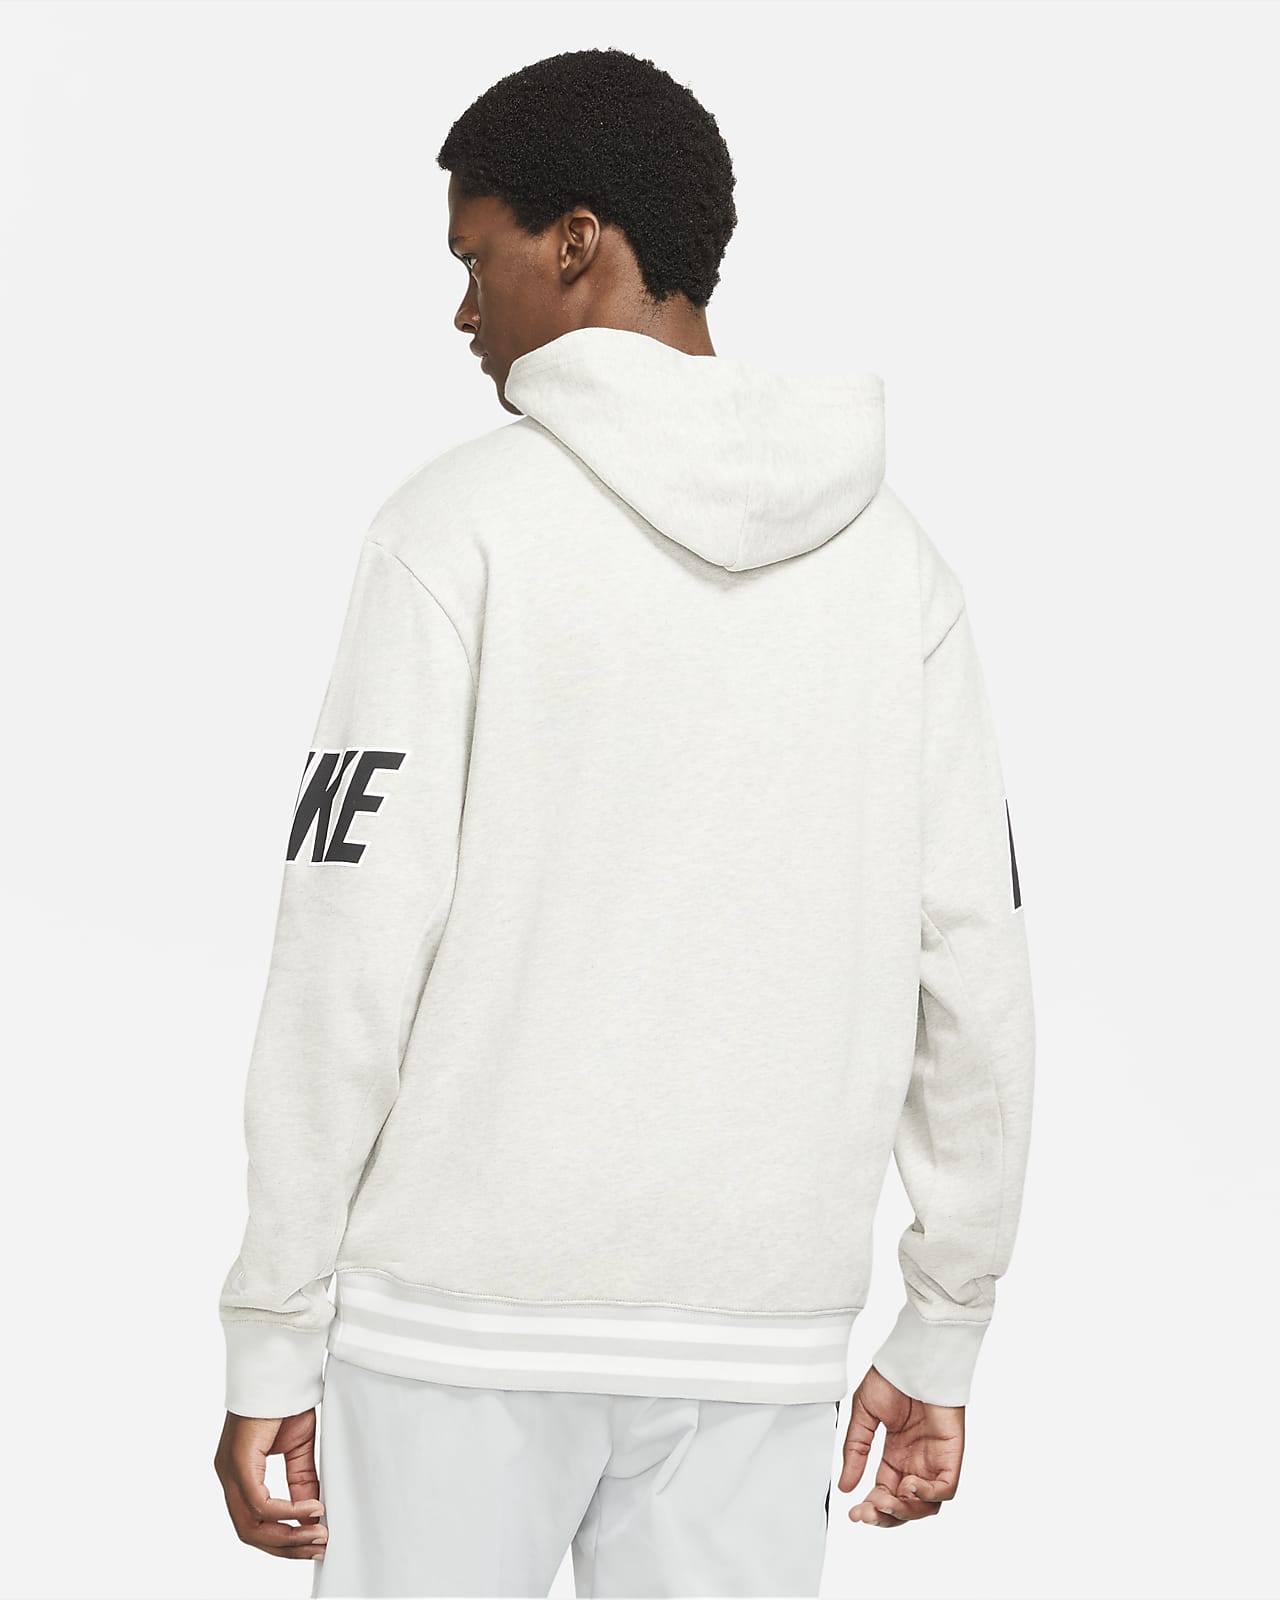 Nike Sportswear Men's French Terry Pullover Hoodie. Nike BE